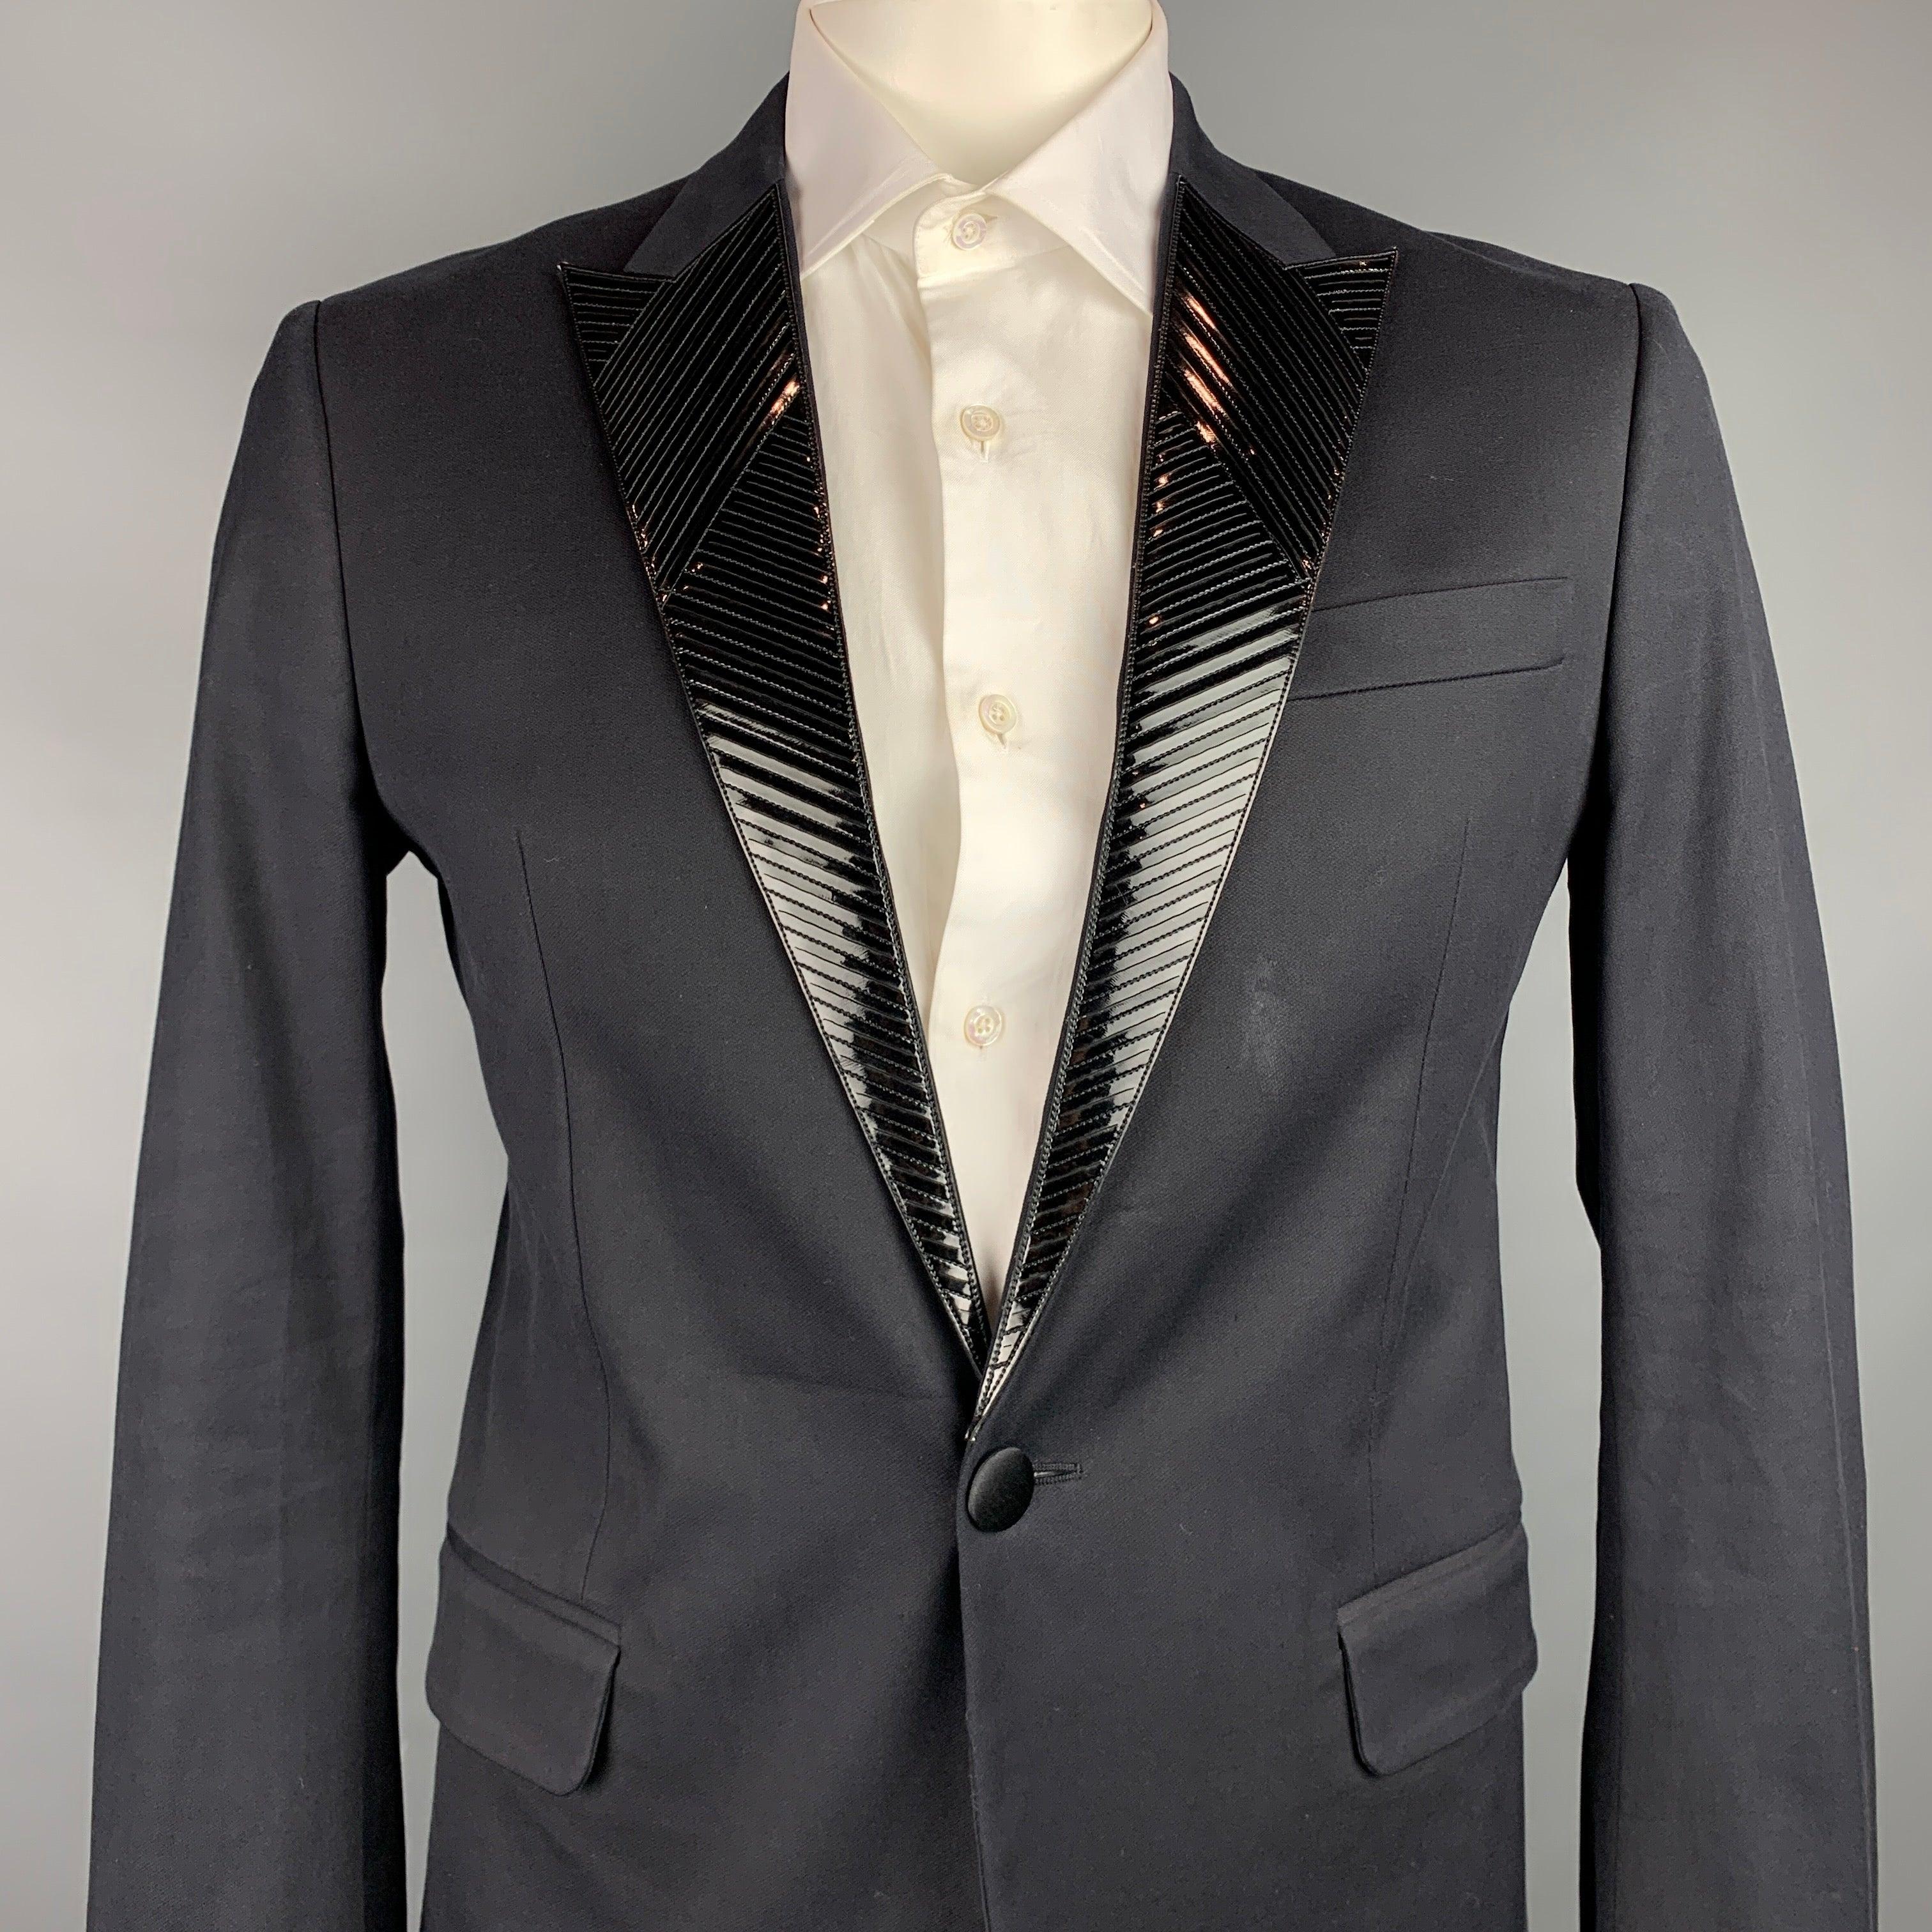 DSQAURED2
sport coat comes in a black cotton with a full monogram print liner featuring a patent leather peak lapel, flap pockets, and a single button closure. Made in Italy.Very Good Pre-Owned Condition. 

Marked:   52 

Measurements: 
 
Shoulder: